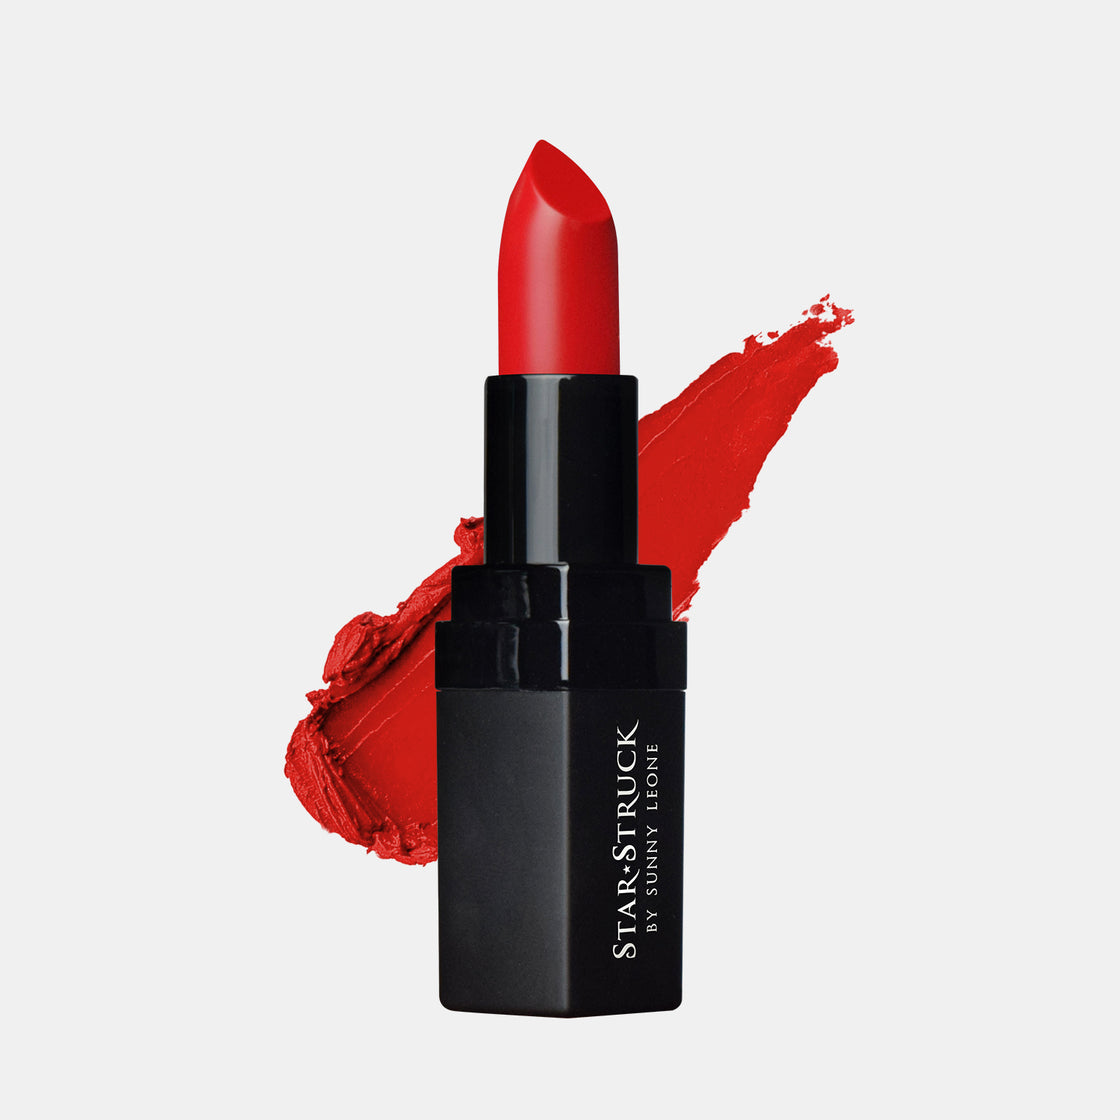 Red Carpet - Luxe Matte Lipstick, Bright Red | 4.2gms